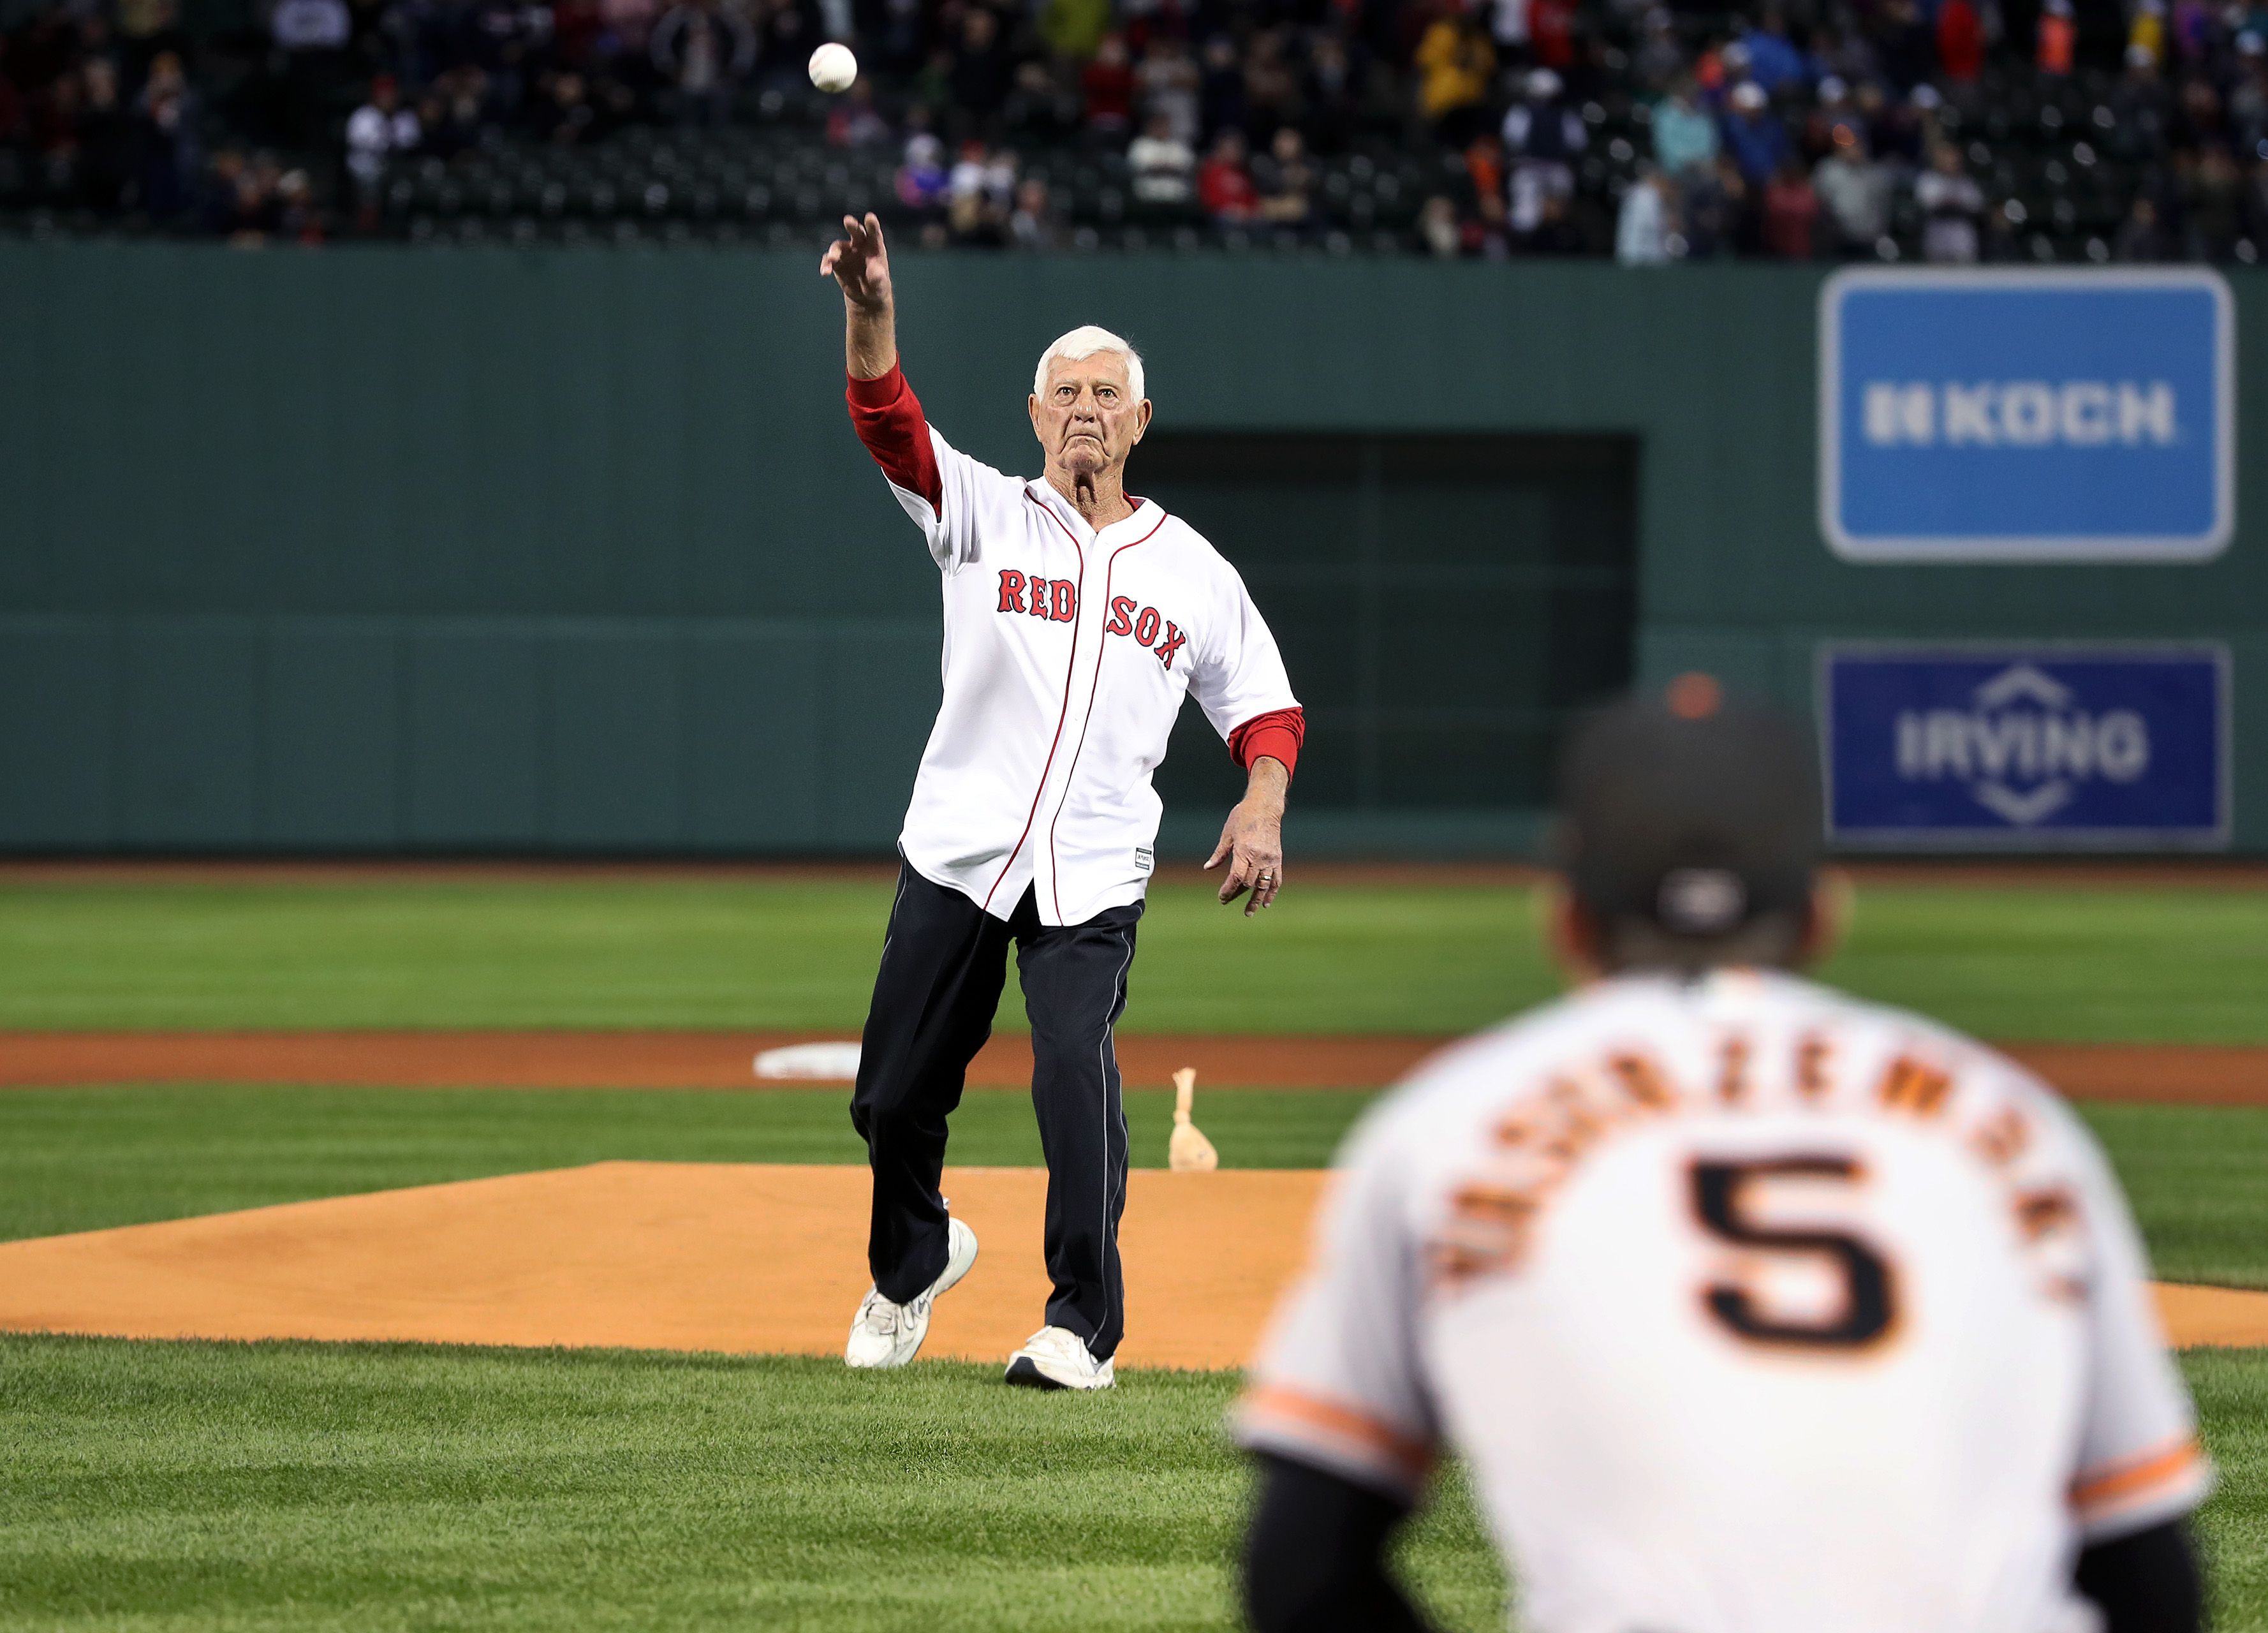 World Series 2013: Carl Yastrzemski will throw out Game 1's first